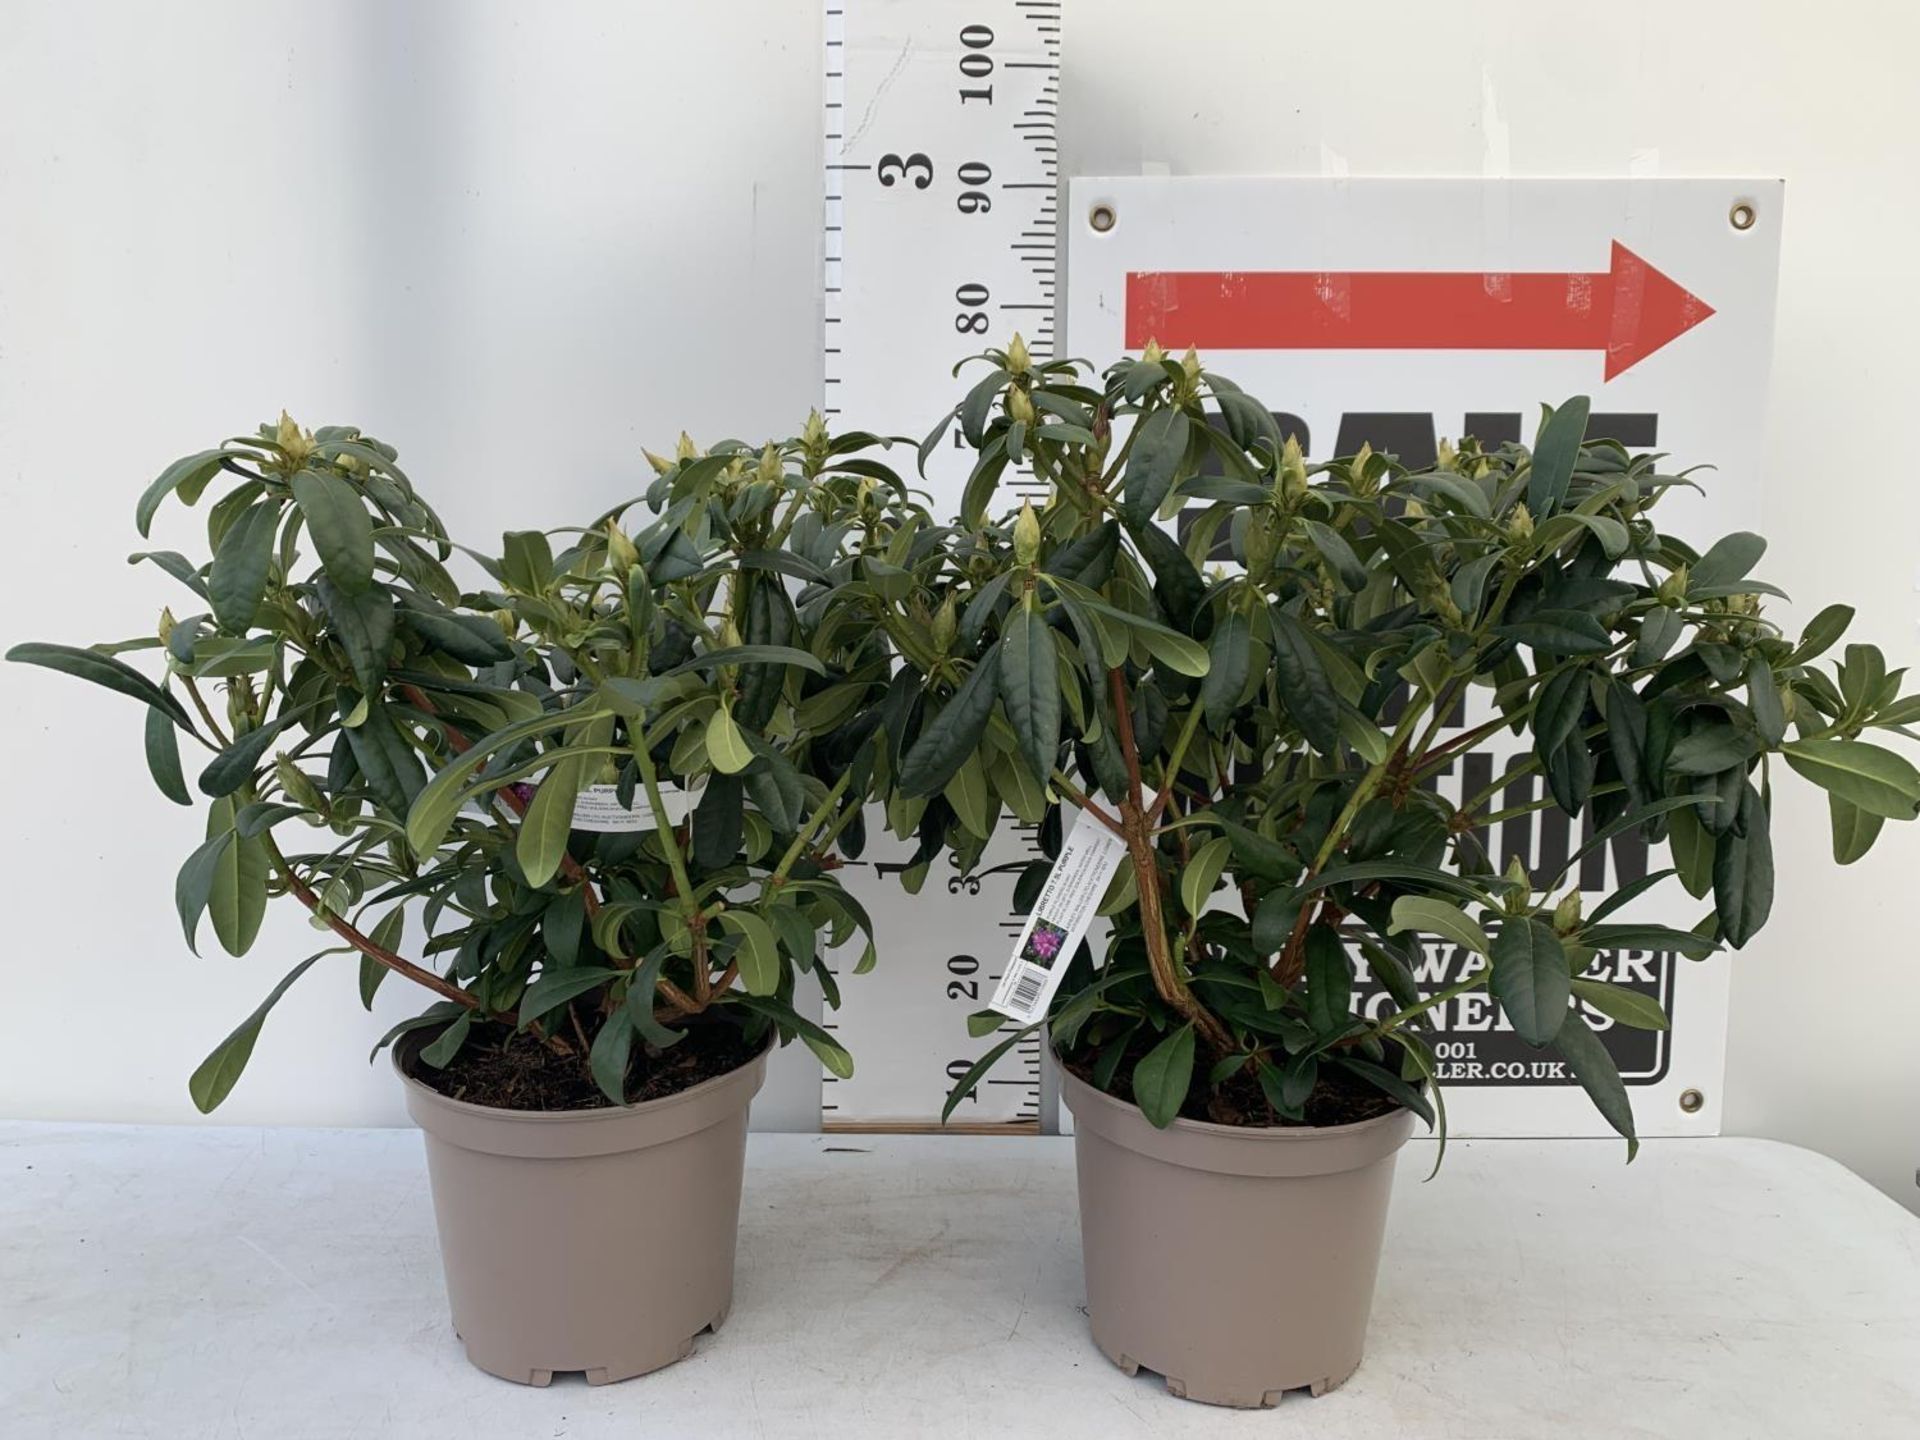 TWO RHODODENDRONS LIBRETTO PURPLE IN 7.5 LTR POTS APPROX 70CM IN HEIGHT PLUS VAT TO BE SOLD FOR - Image 2 of 8